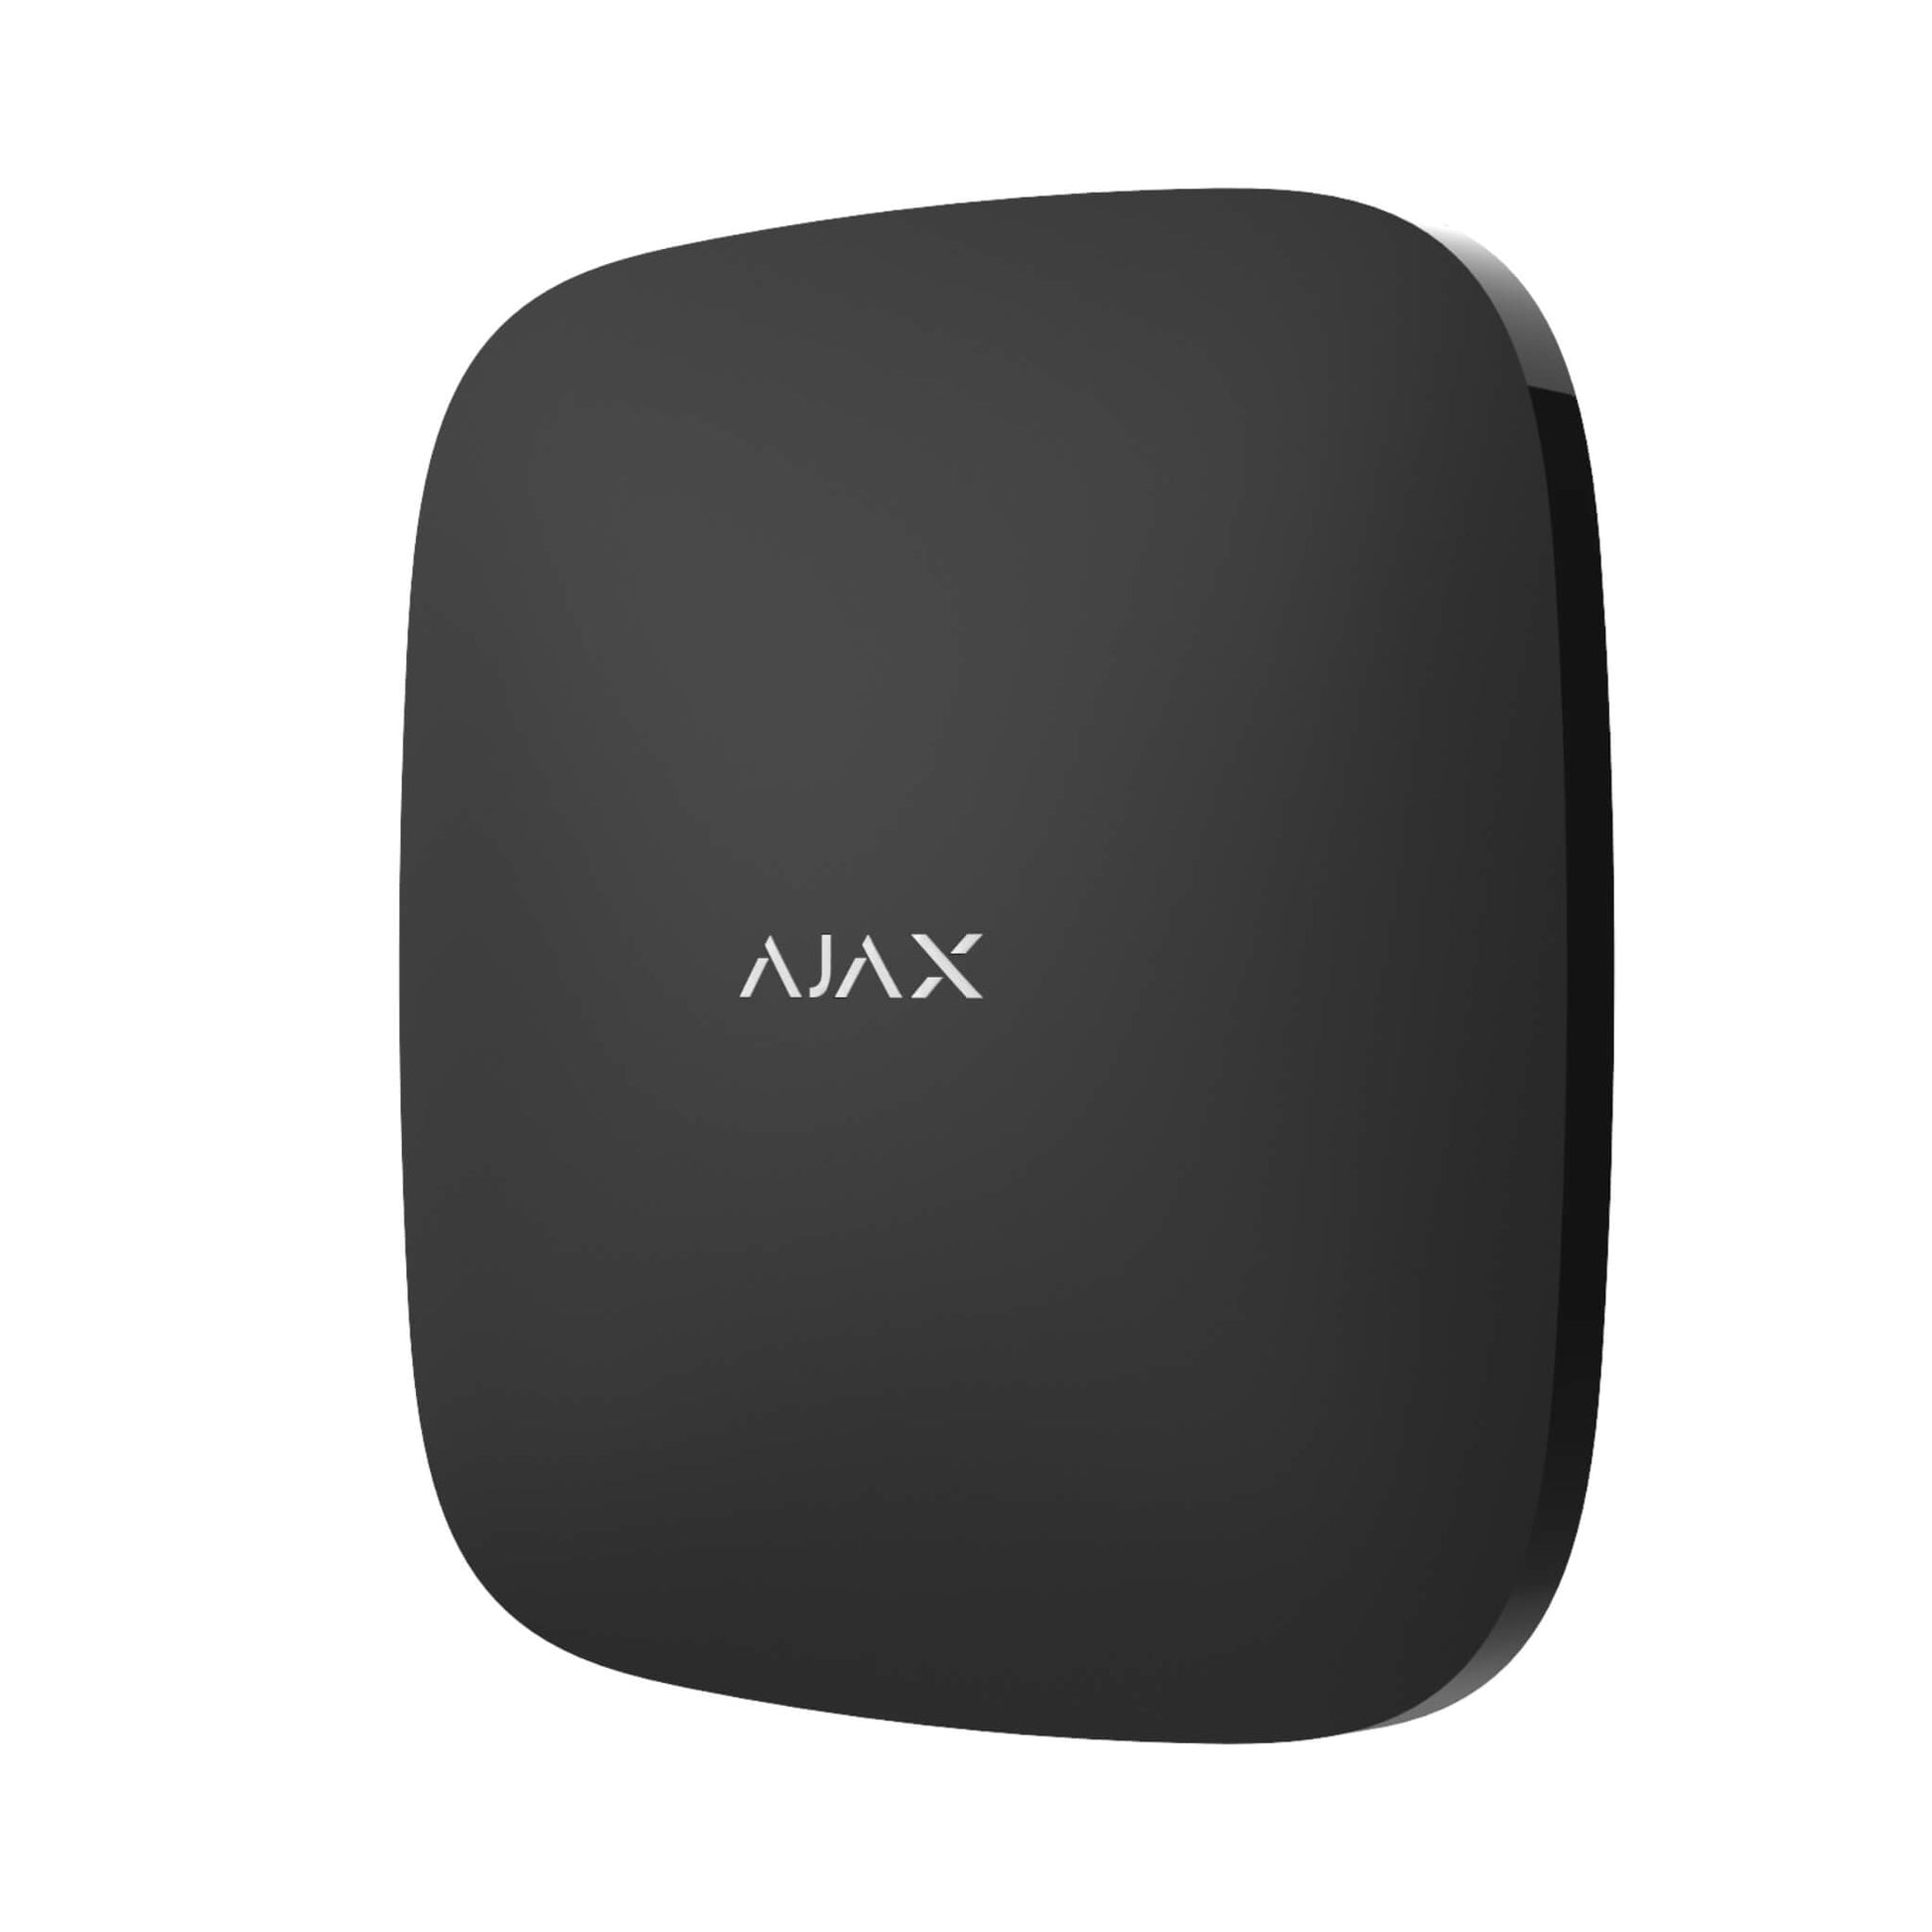 Ajax Security Systems Black ReX Radio range extender for Ajax Systems, for Home and Business security, 163 × 163 × 36 mm in size, 330 grams in weight , rated for Indoor use IP50, Turned Right view of Device.